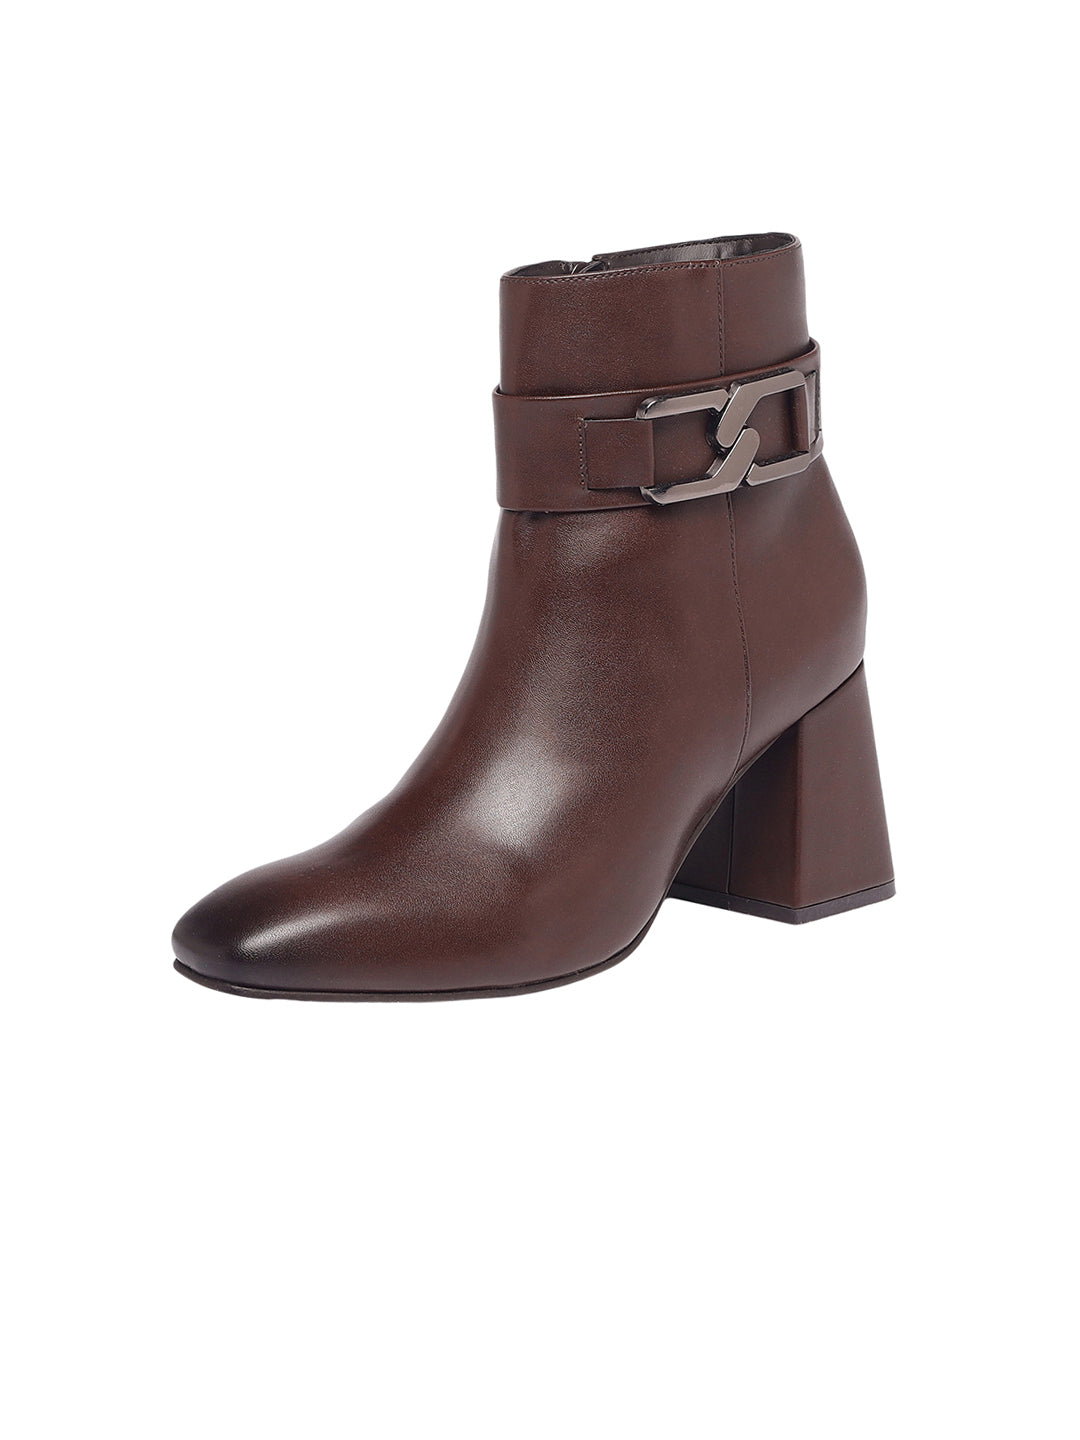 Enigma Brown Boots